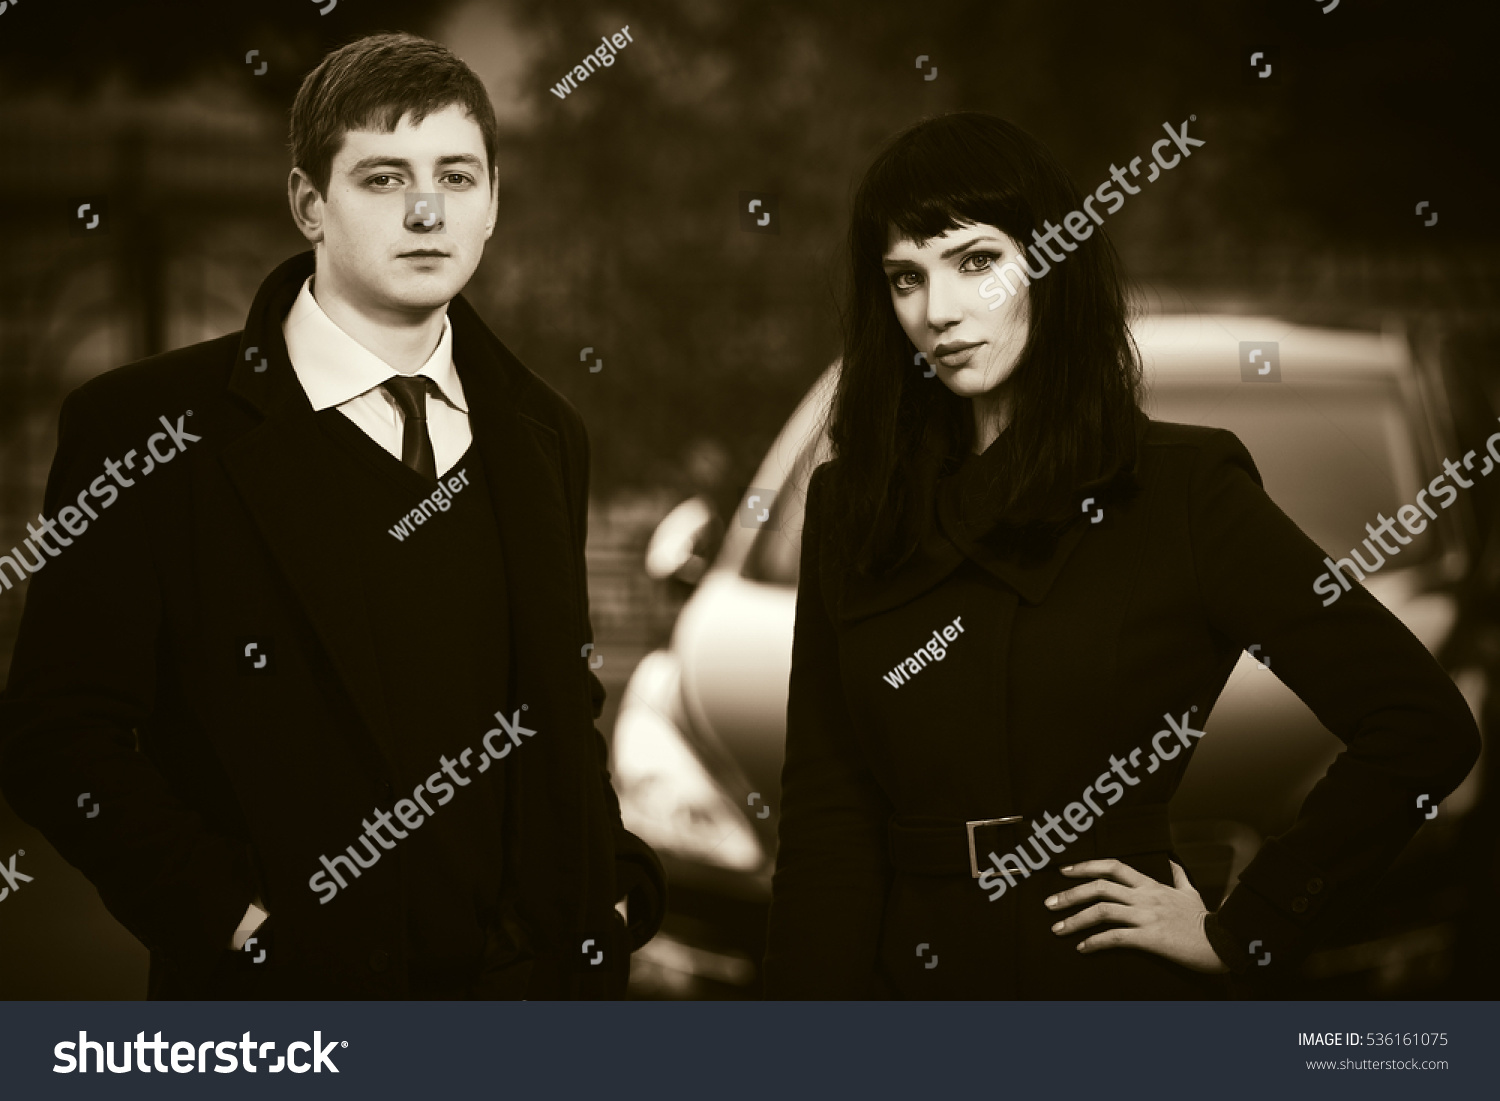 Young Business Couple Next Car Parking Stock Photo 536161075 ...